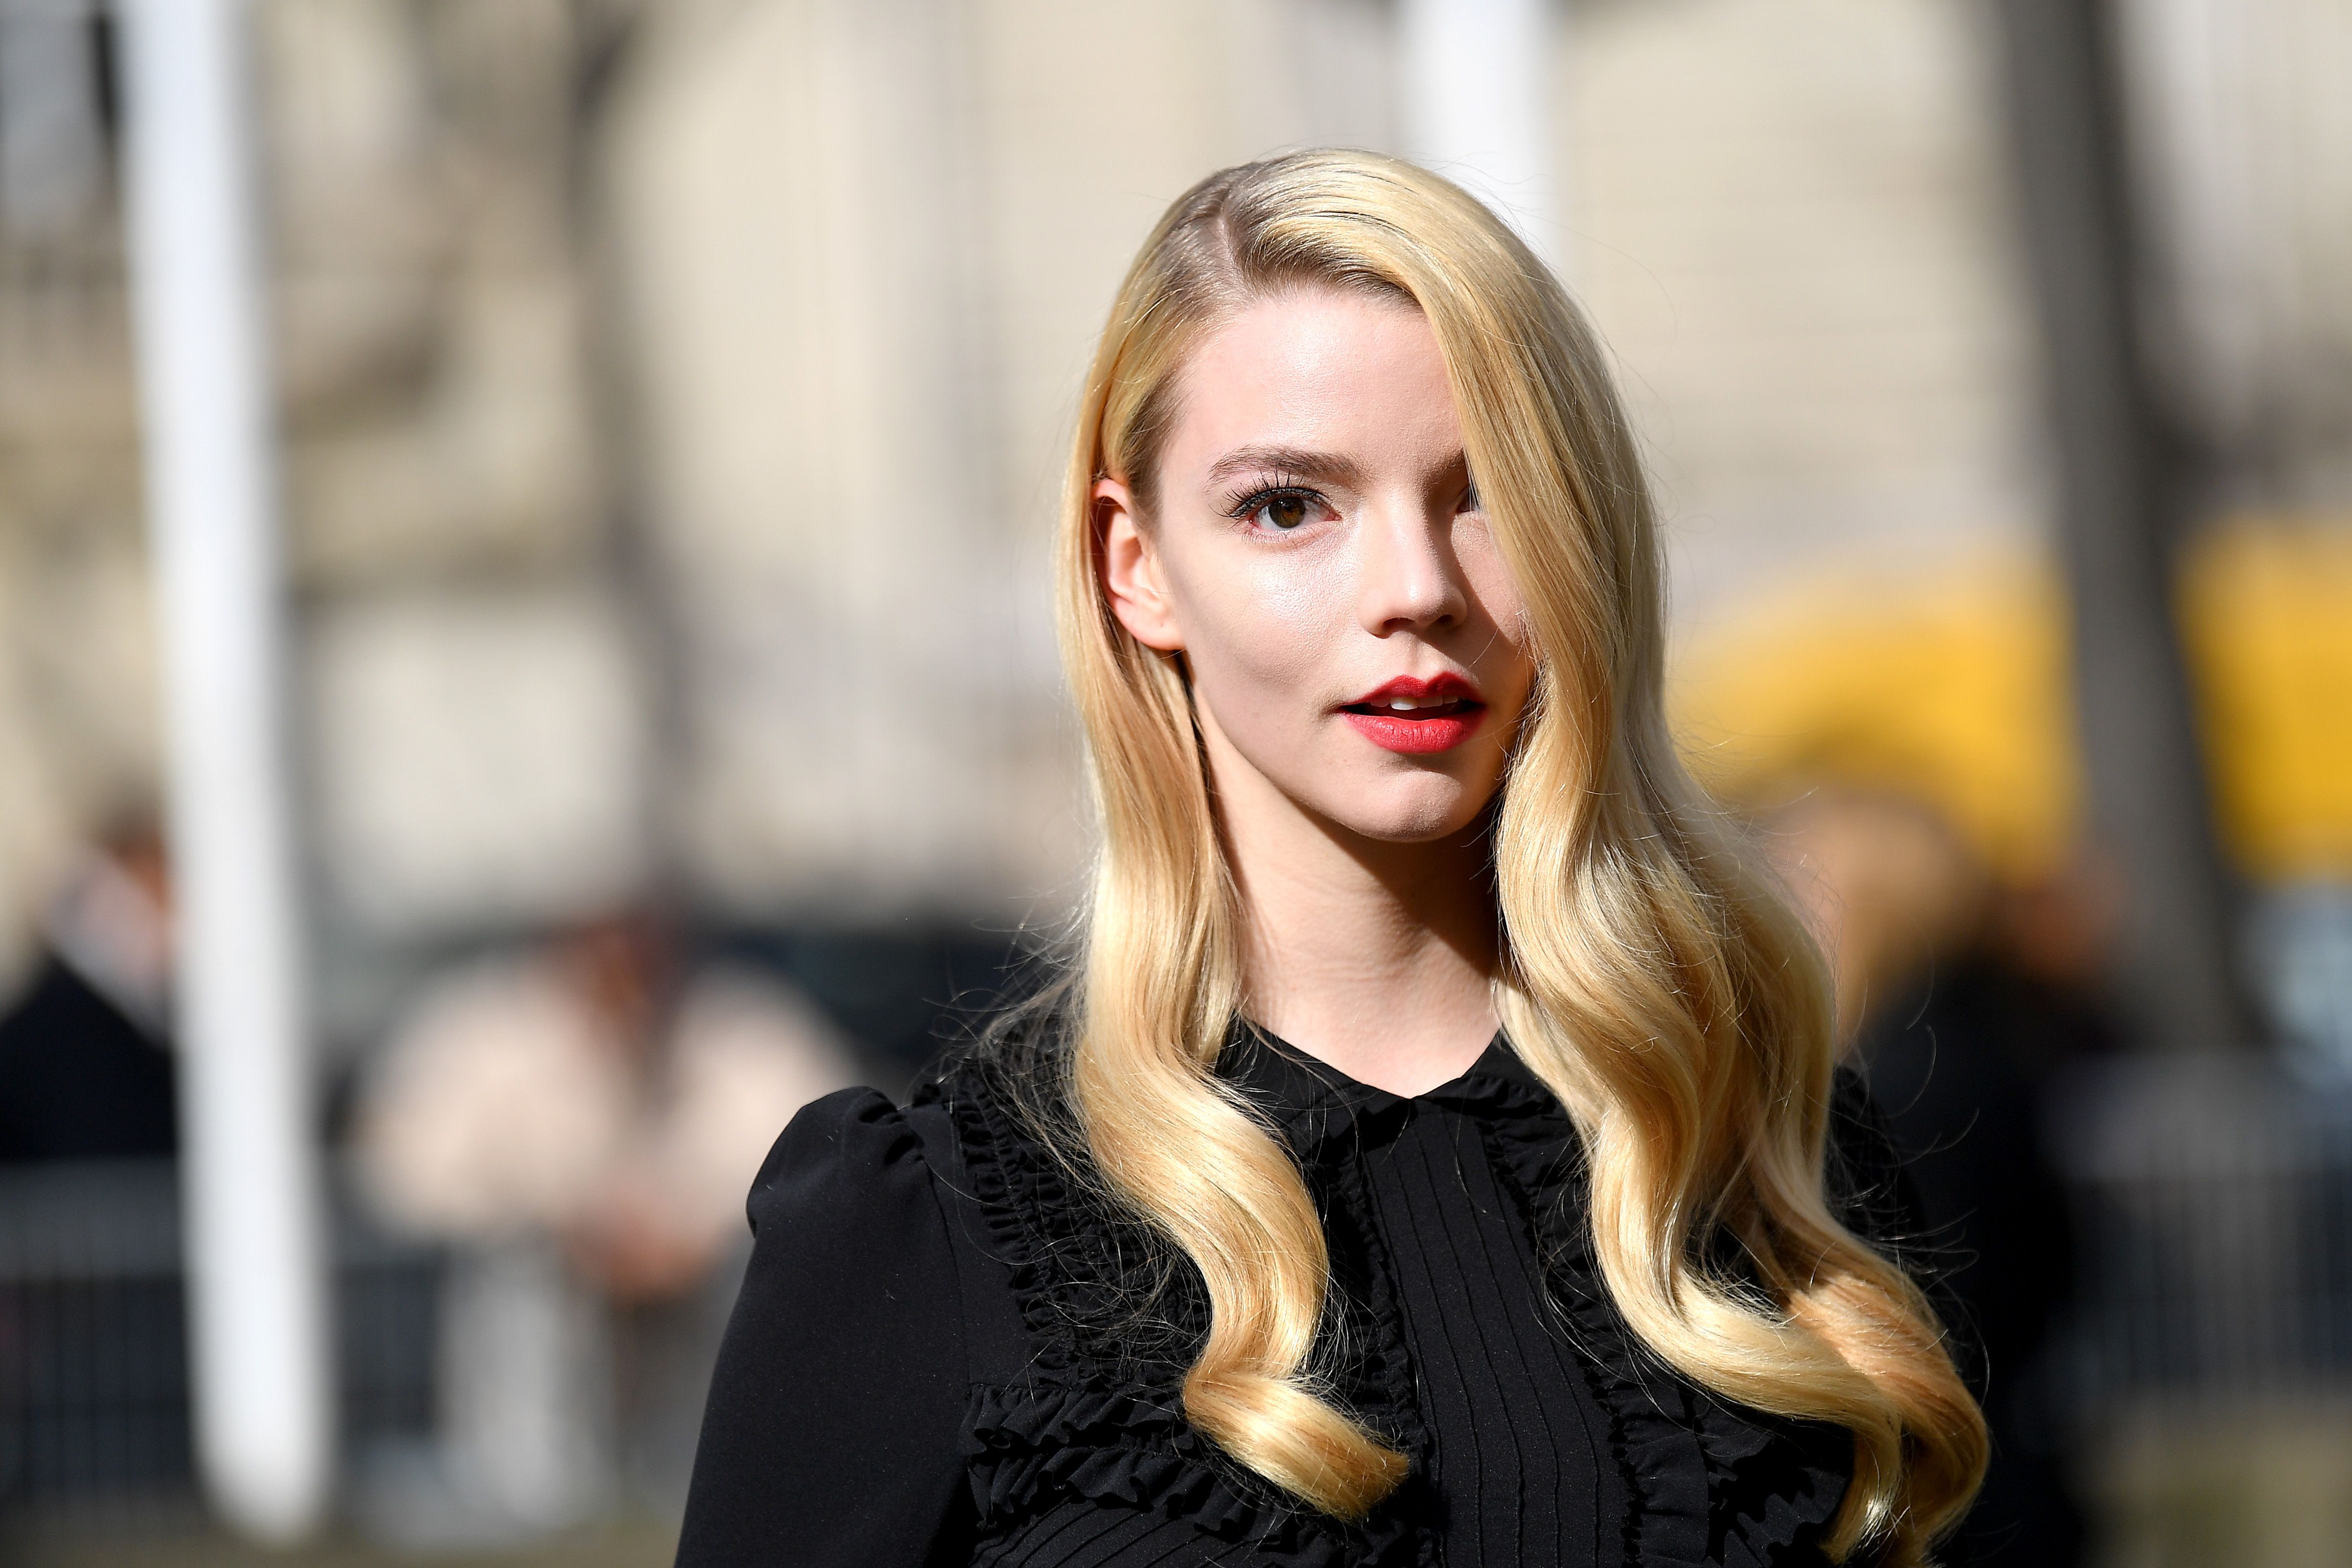 Anya Taylor-Joy at the Miu Miu show as part of the Paris Fashion Week Womenswear Fall/Winter 2020/2021 on March 03, 2020. | Photo: Getty Images